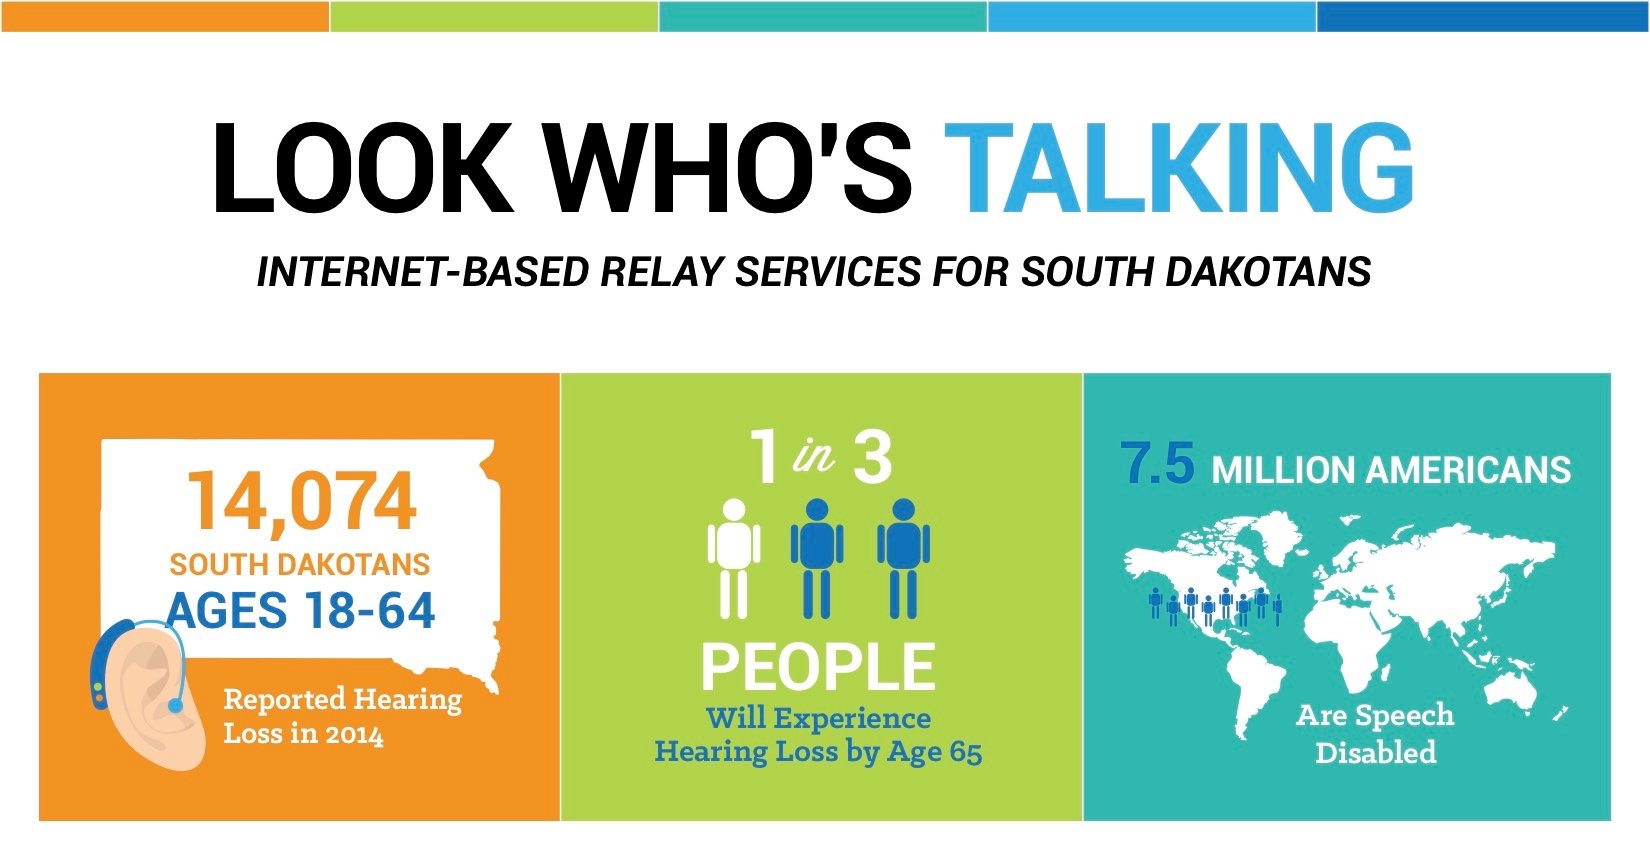 Look Who’s Talking: Internet-Based Relay Services for South Dakotans